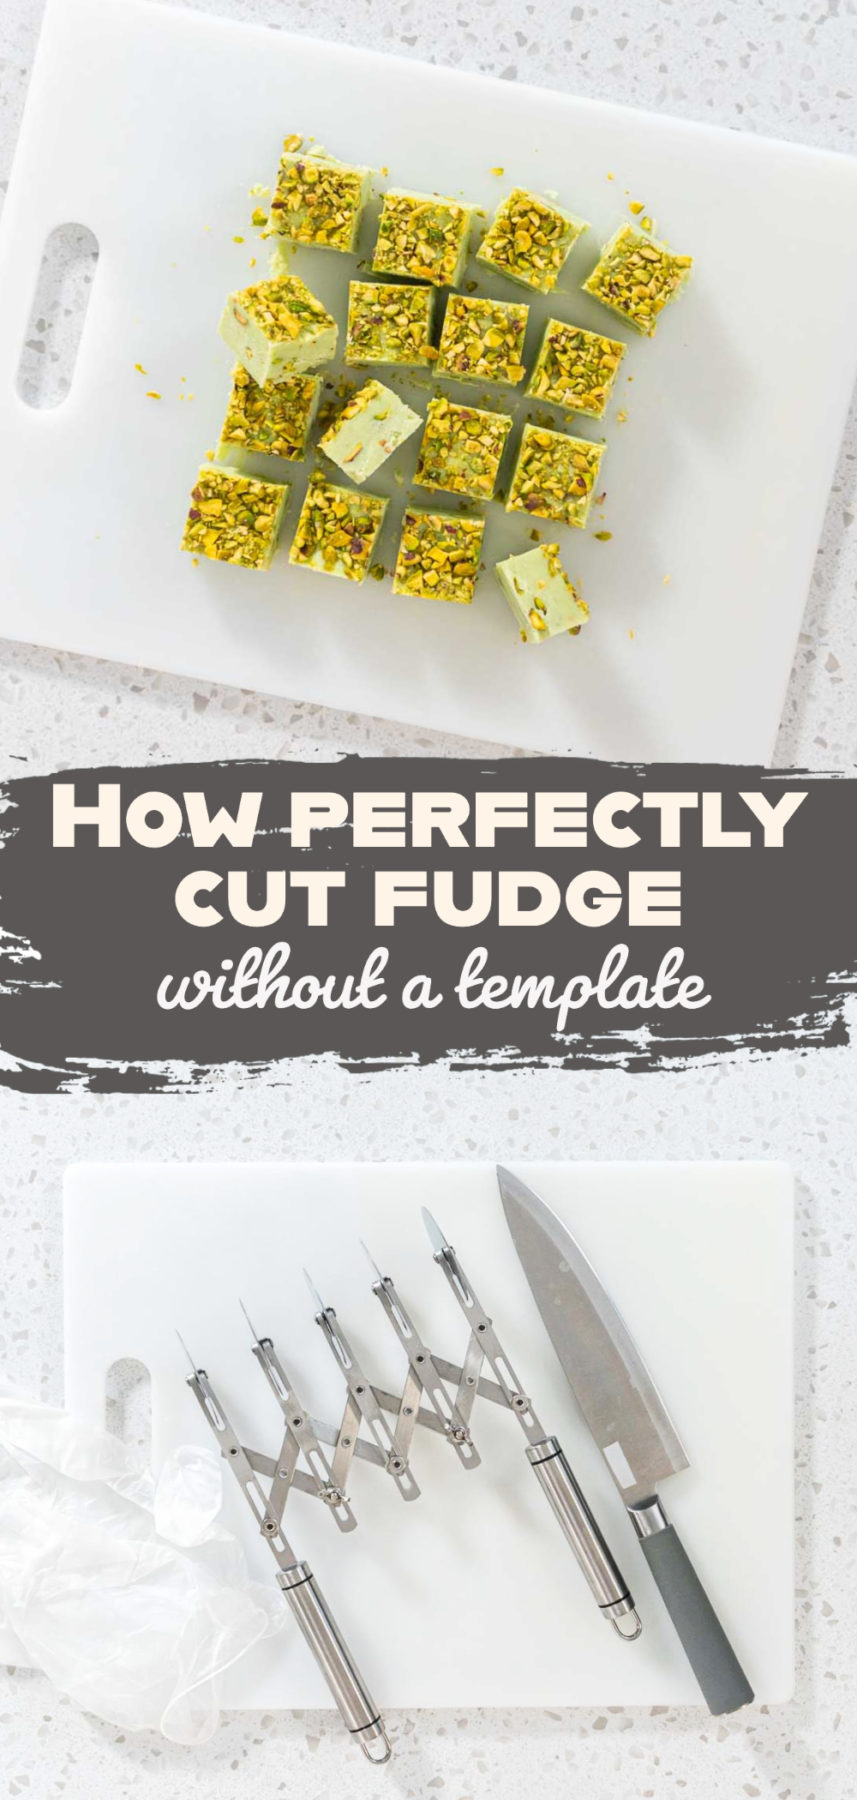 How perfectly cut fudge without a template